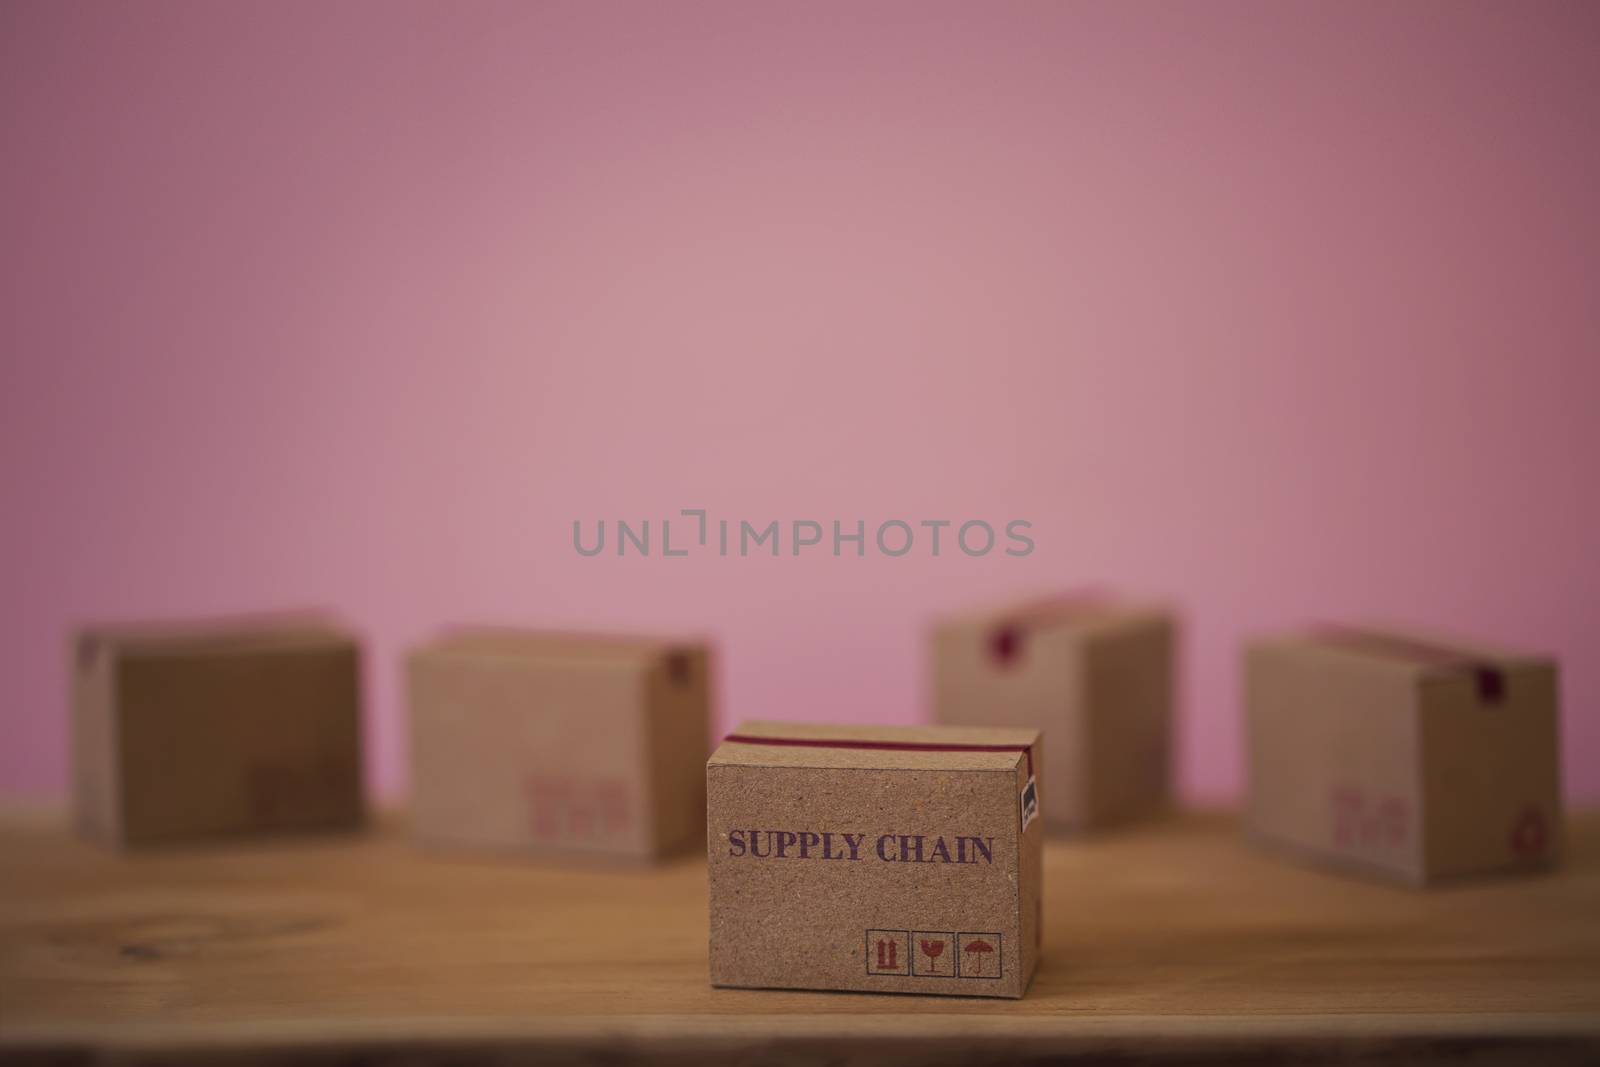 Arrange cardboard boxes for packing of goods. Supply chain / logistic distributor and delivery service concept by setila